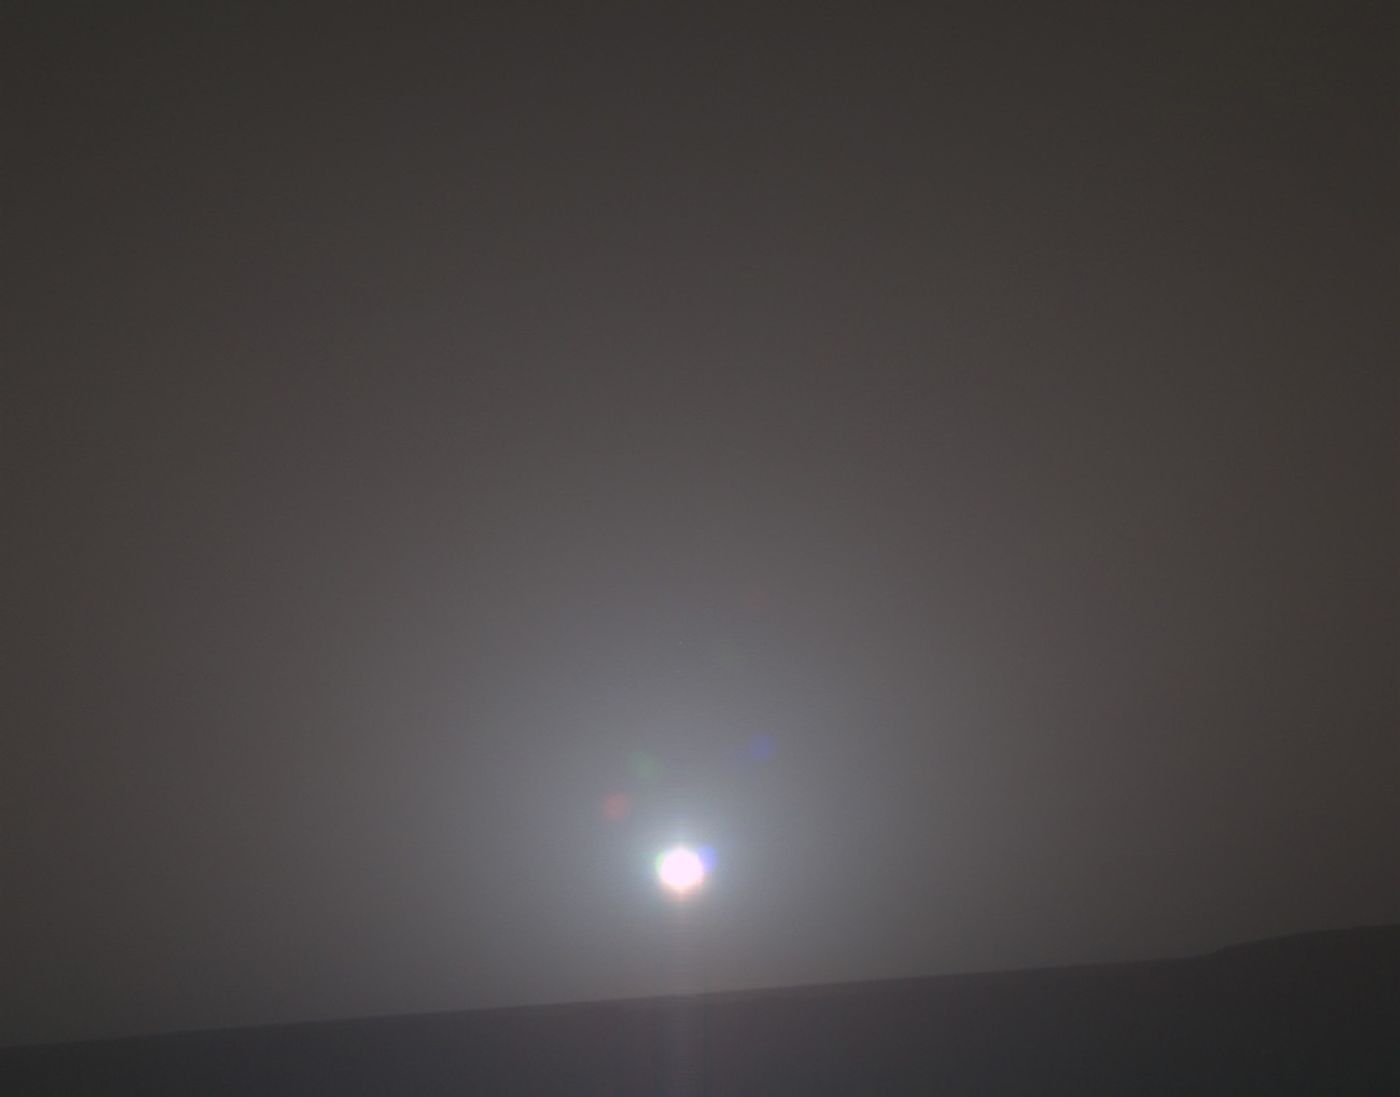 This image, captured by Opportunity's Panoramic Camera (Pancam) illustrates the rover's 4,999th sunrise.